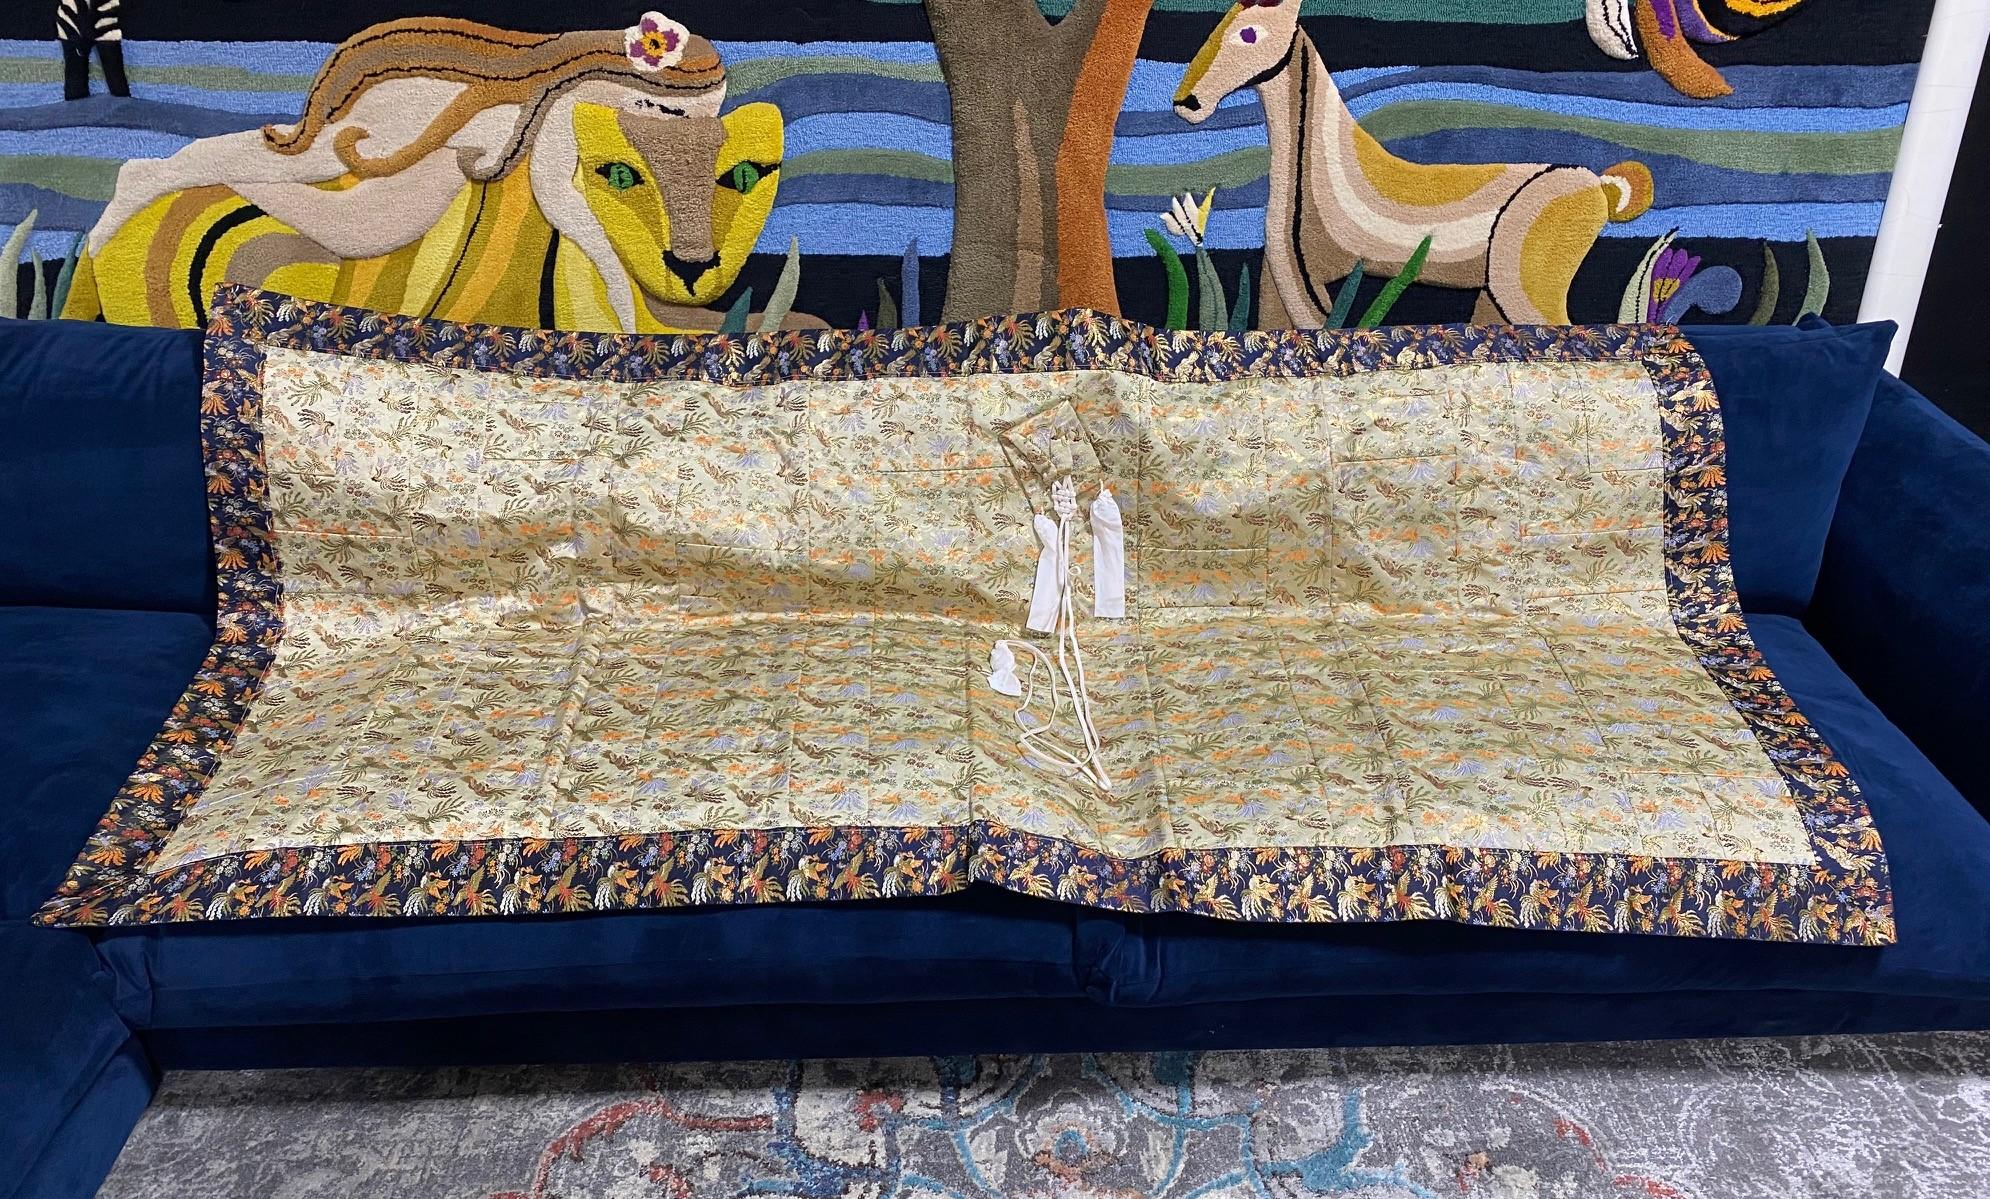 A wonderful, beautifully ornamented and somewhat rare fully intact Japanese Buddhist monk/ priest's Kesa ceremonial silk robe featuring various colorful birds in flight.
Kesa (which came from the Chinese word 